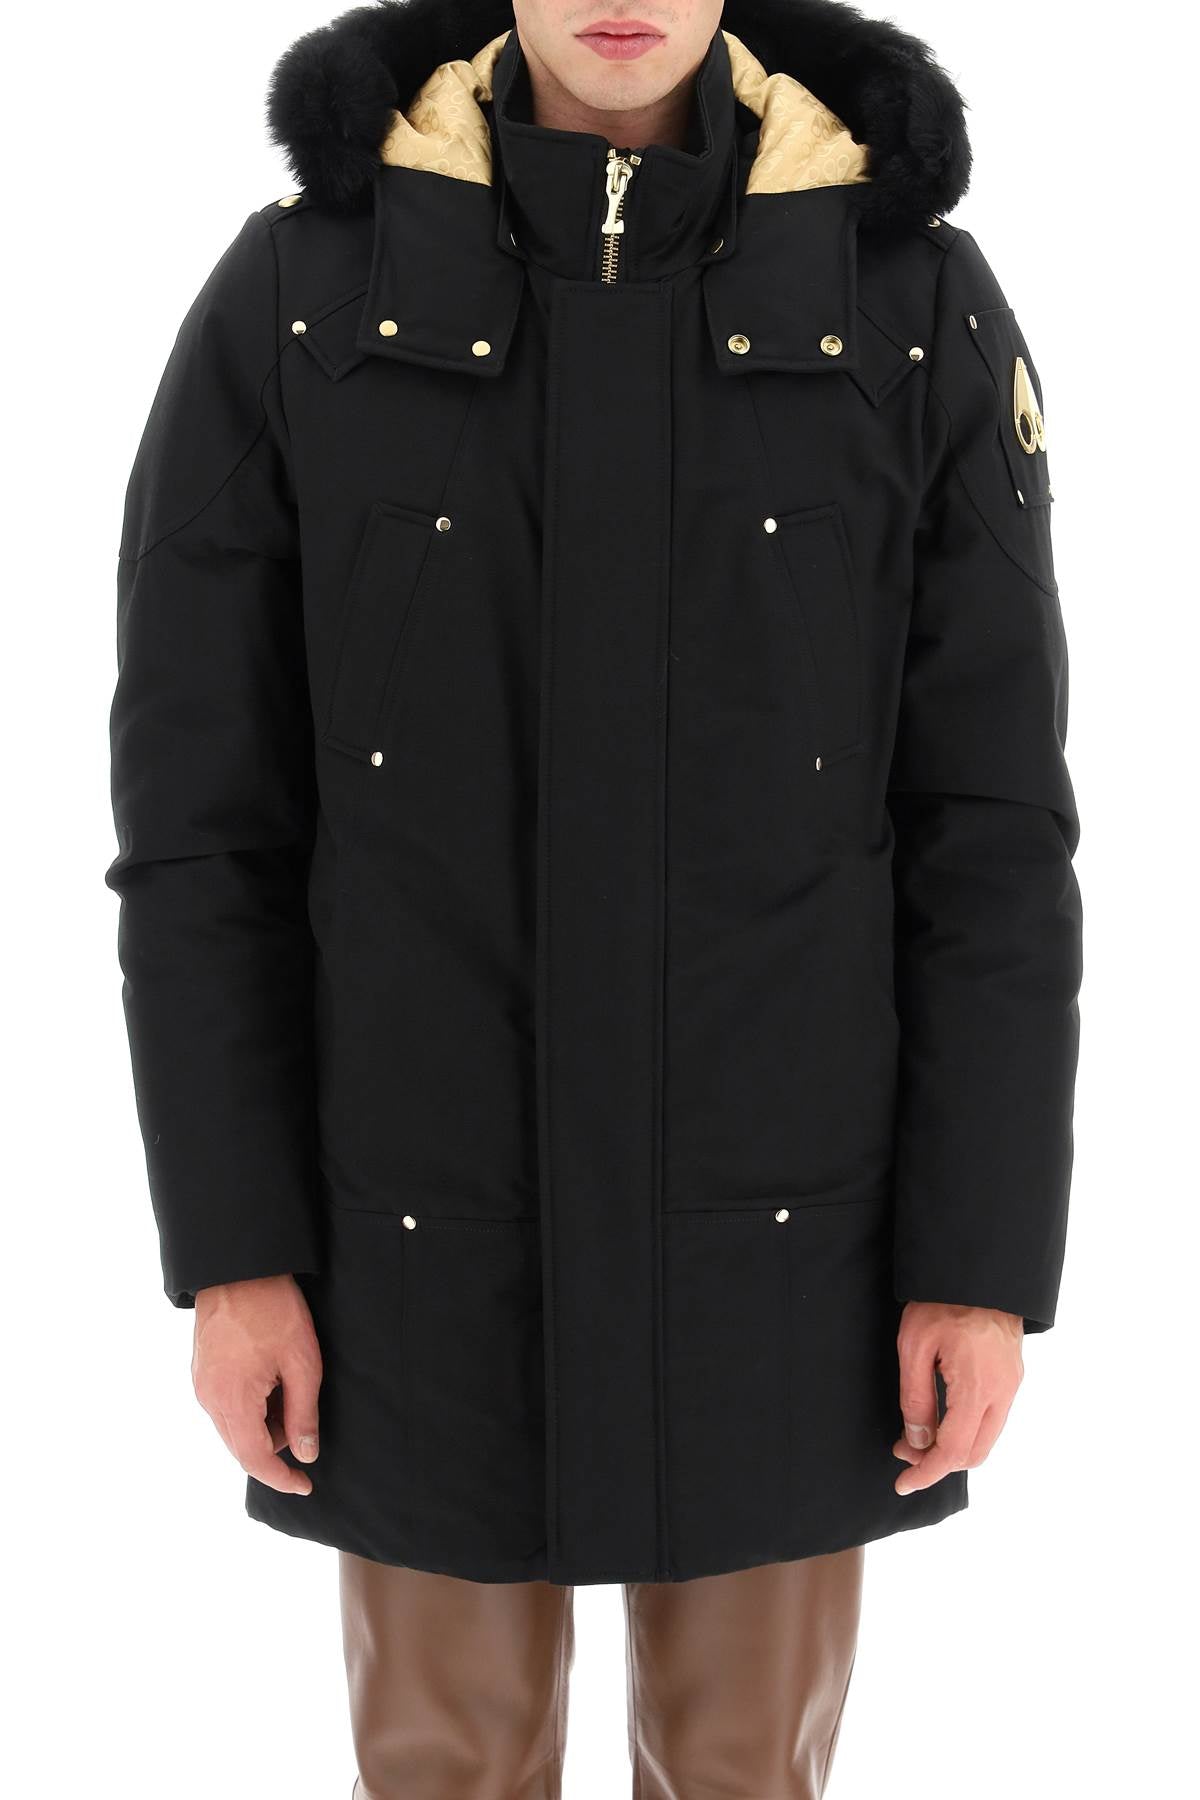 Moose knuckles gold stirling neoshear parka with shearling trimming-1